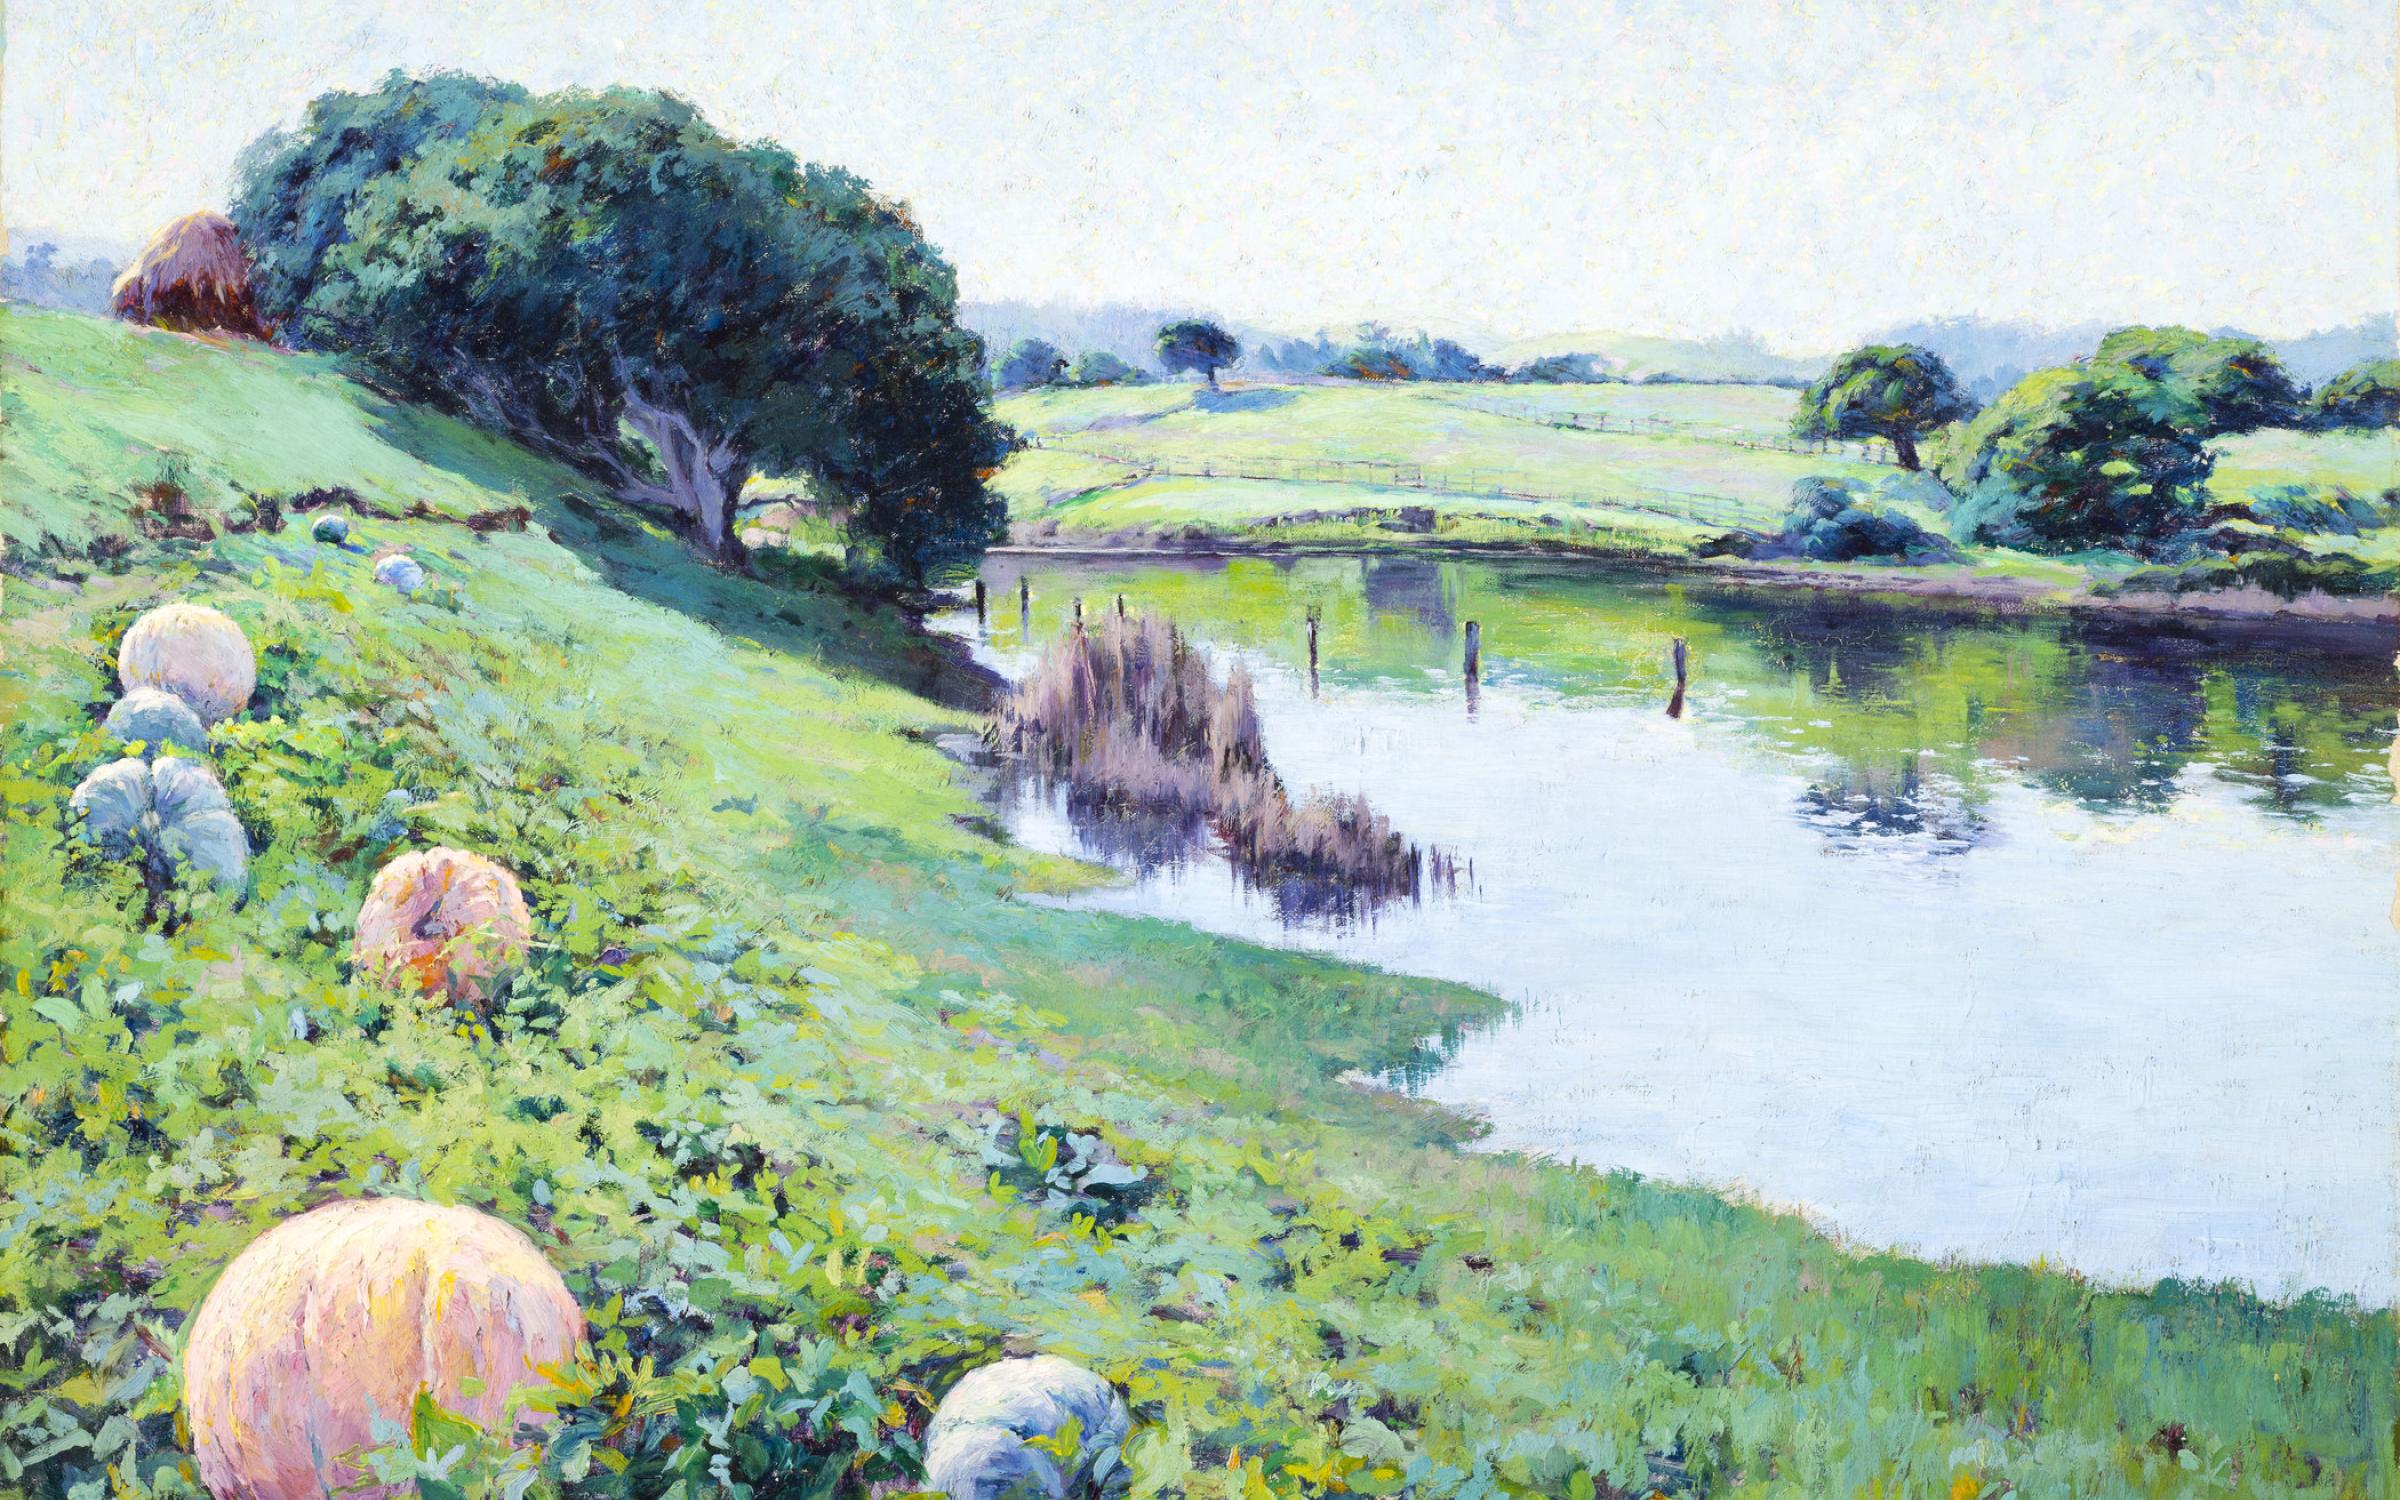 A grassy hill slopes to a shallow pond. Colorful pumpkins dot the foreground.